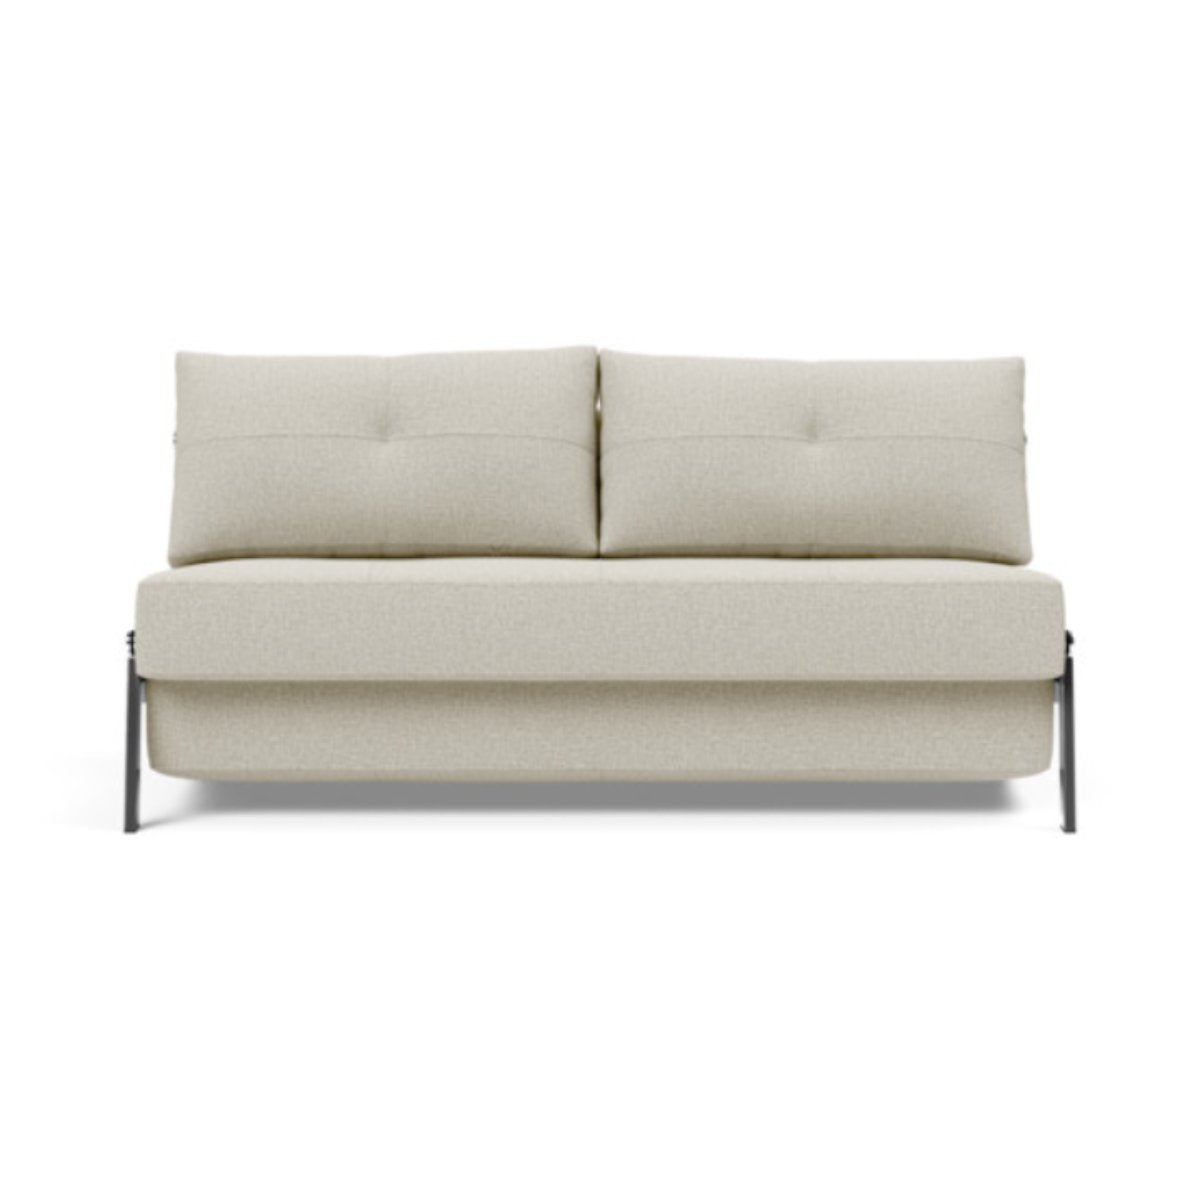 Cubed Queen Size Sofa Bed With Chrome Legs 527 Mixed Dance NaturalSofa Beds INNOVATION  527 Mixed Dance Natural   Four Hands, Burke Decor, Mid Century Modern Furniture, Old Bones Furniture Company, Old Bones Co, Modern Mid Century, Designer Furniture, https://www.oldbonesco.com/